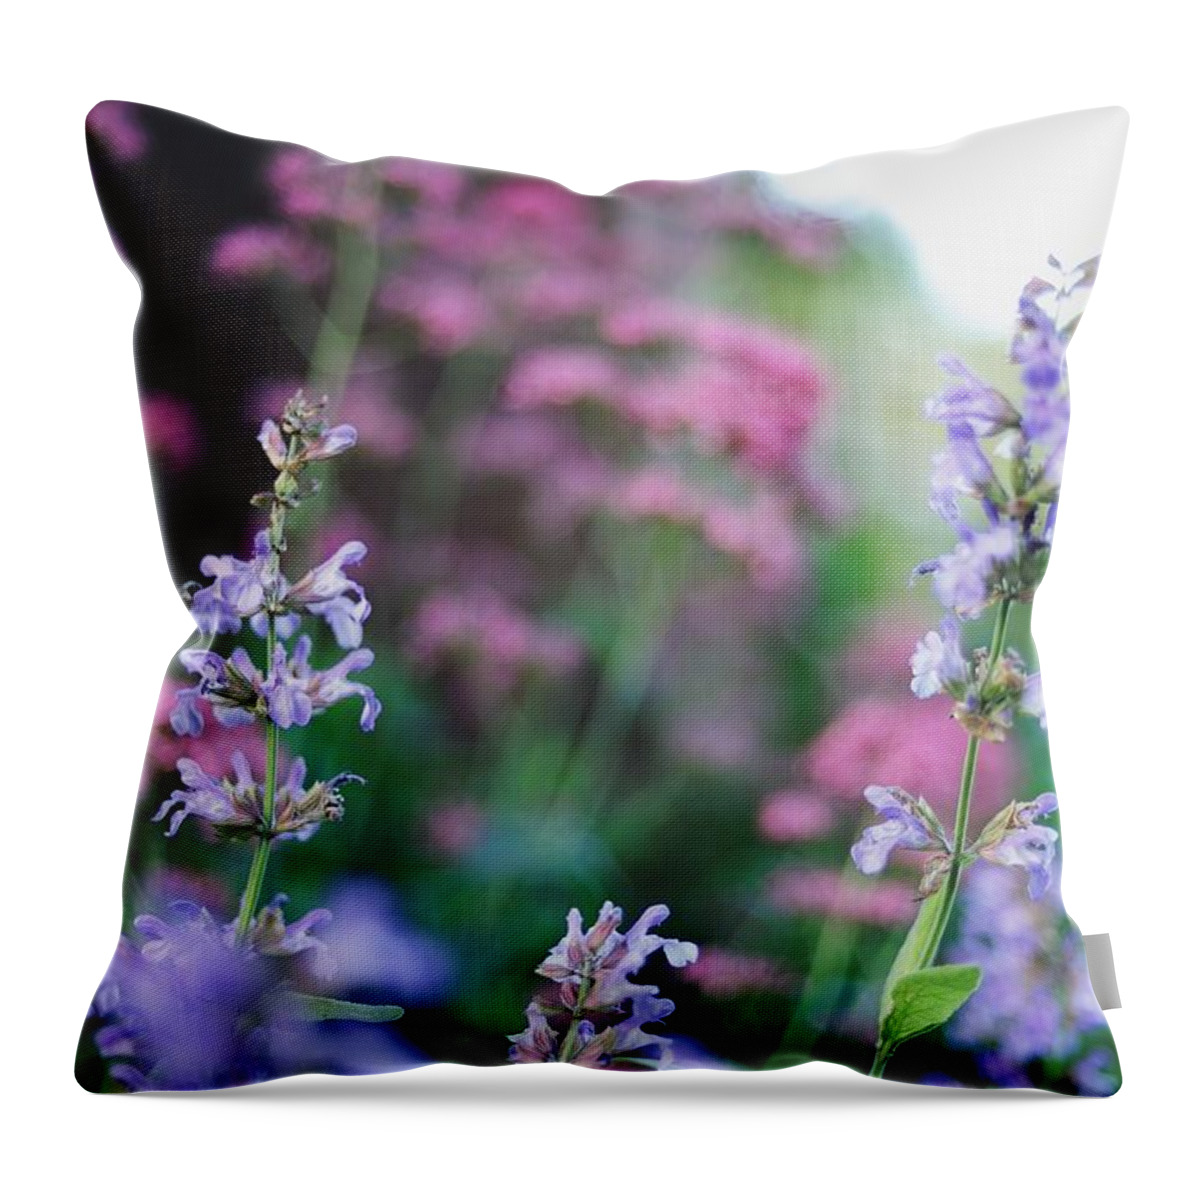 Purple Throw Pillow featuring the photograph Pink And Purple Flowers by Carlina Teteris